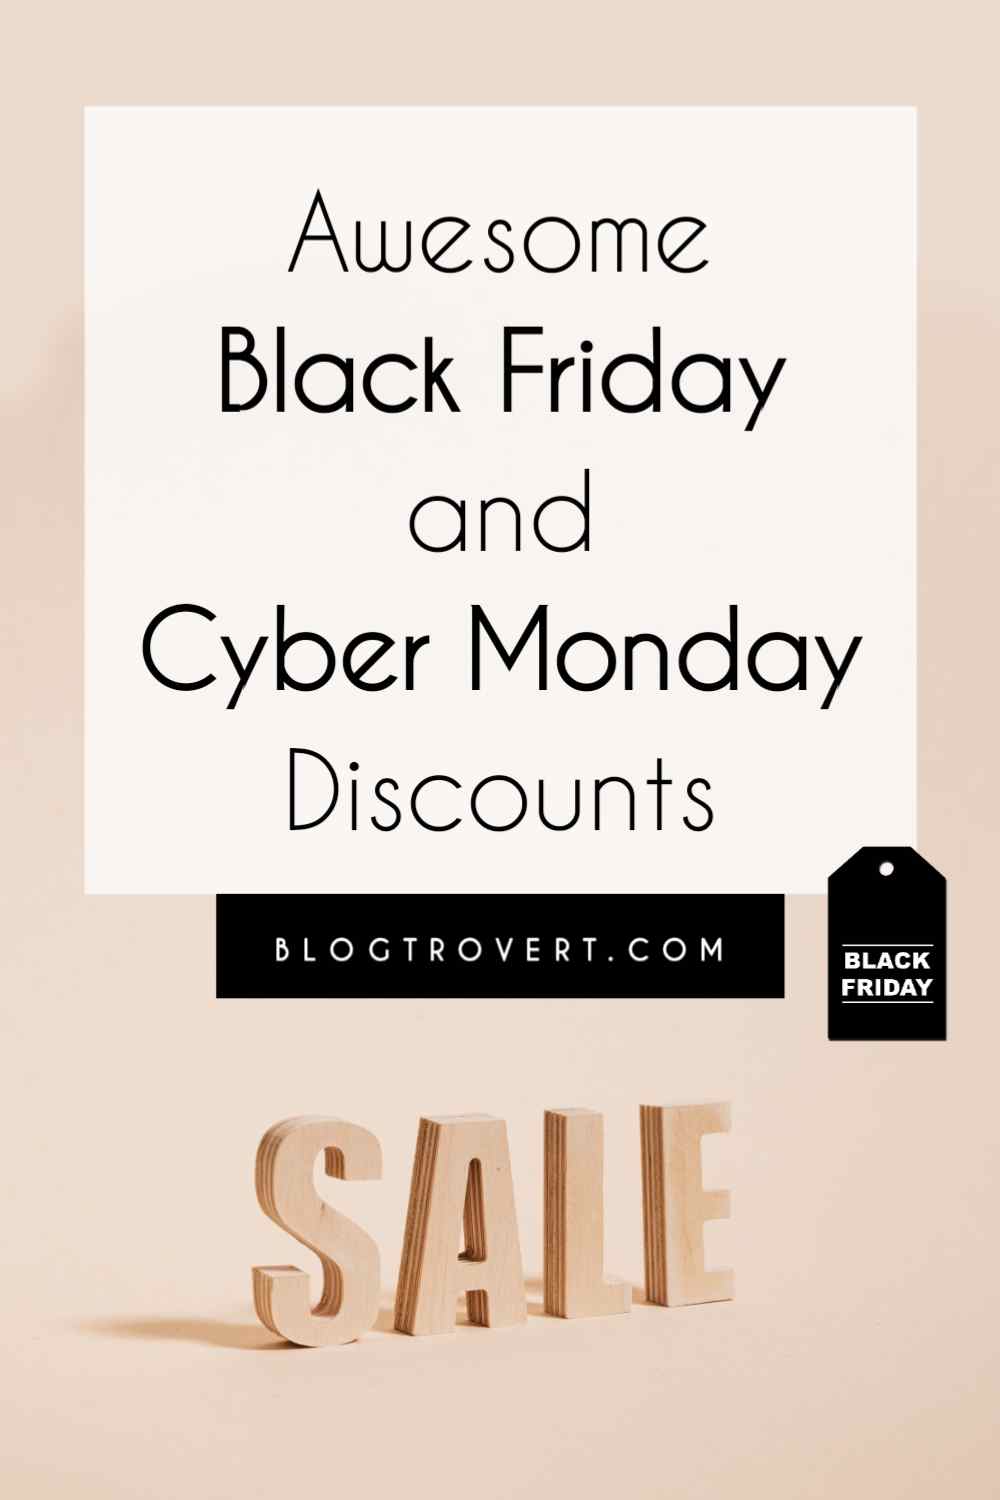 Awesome Black Friday and Cyber Monday Deals For Bloggers and Creatives 7